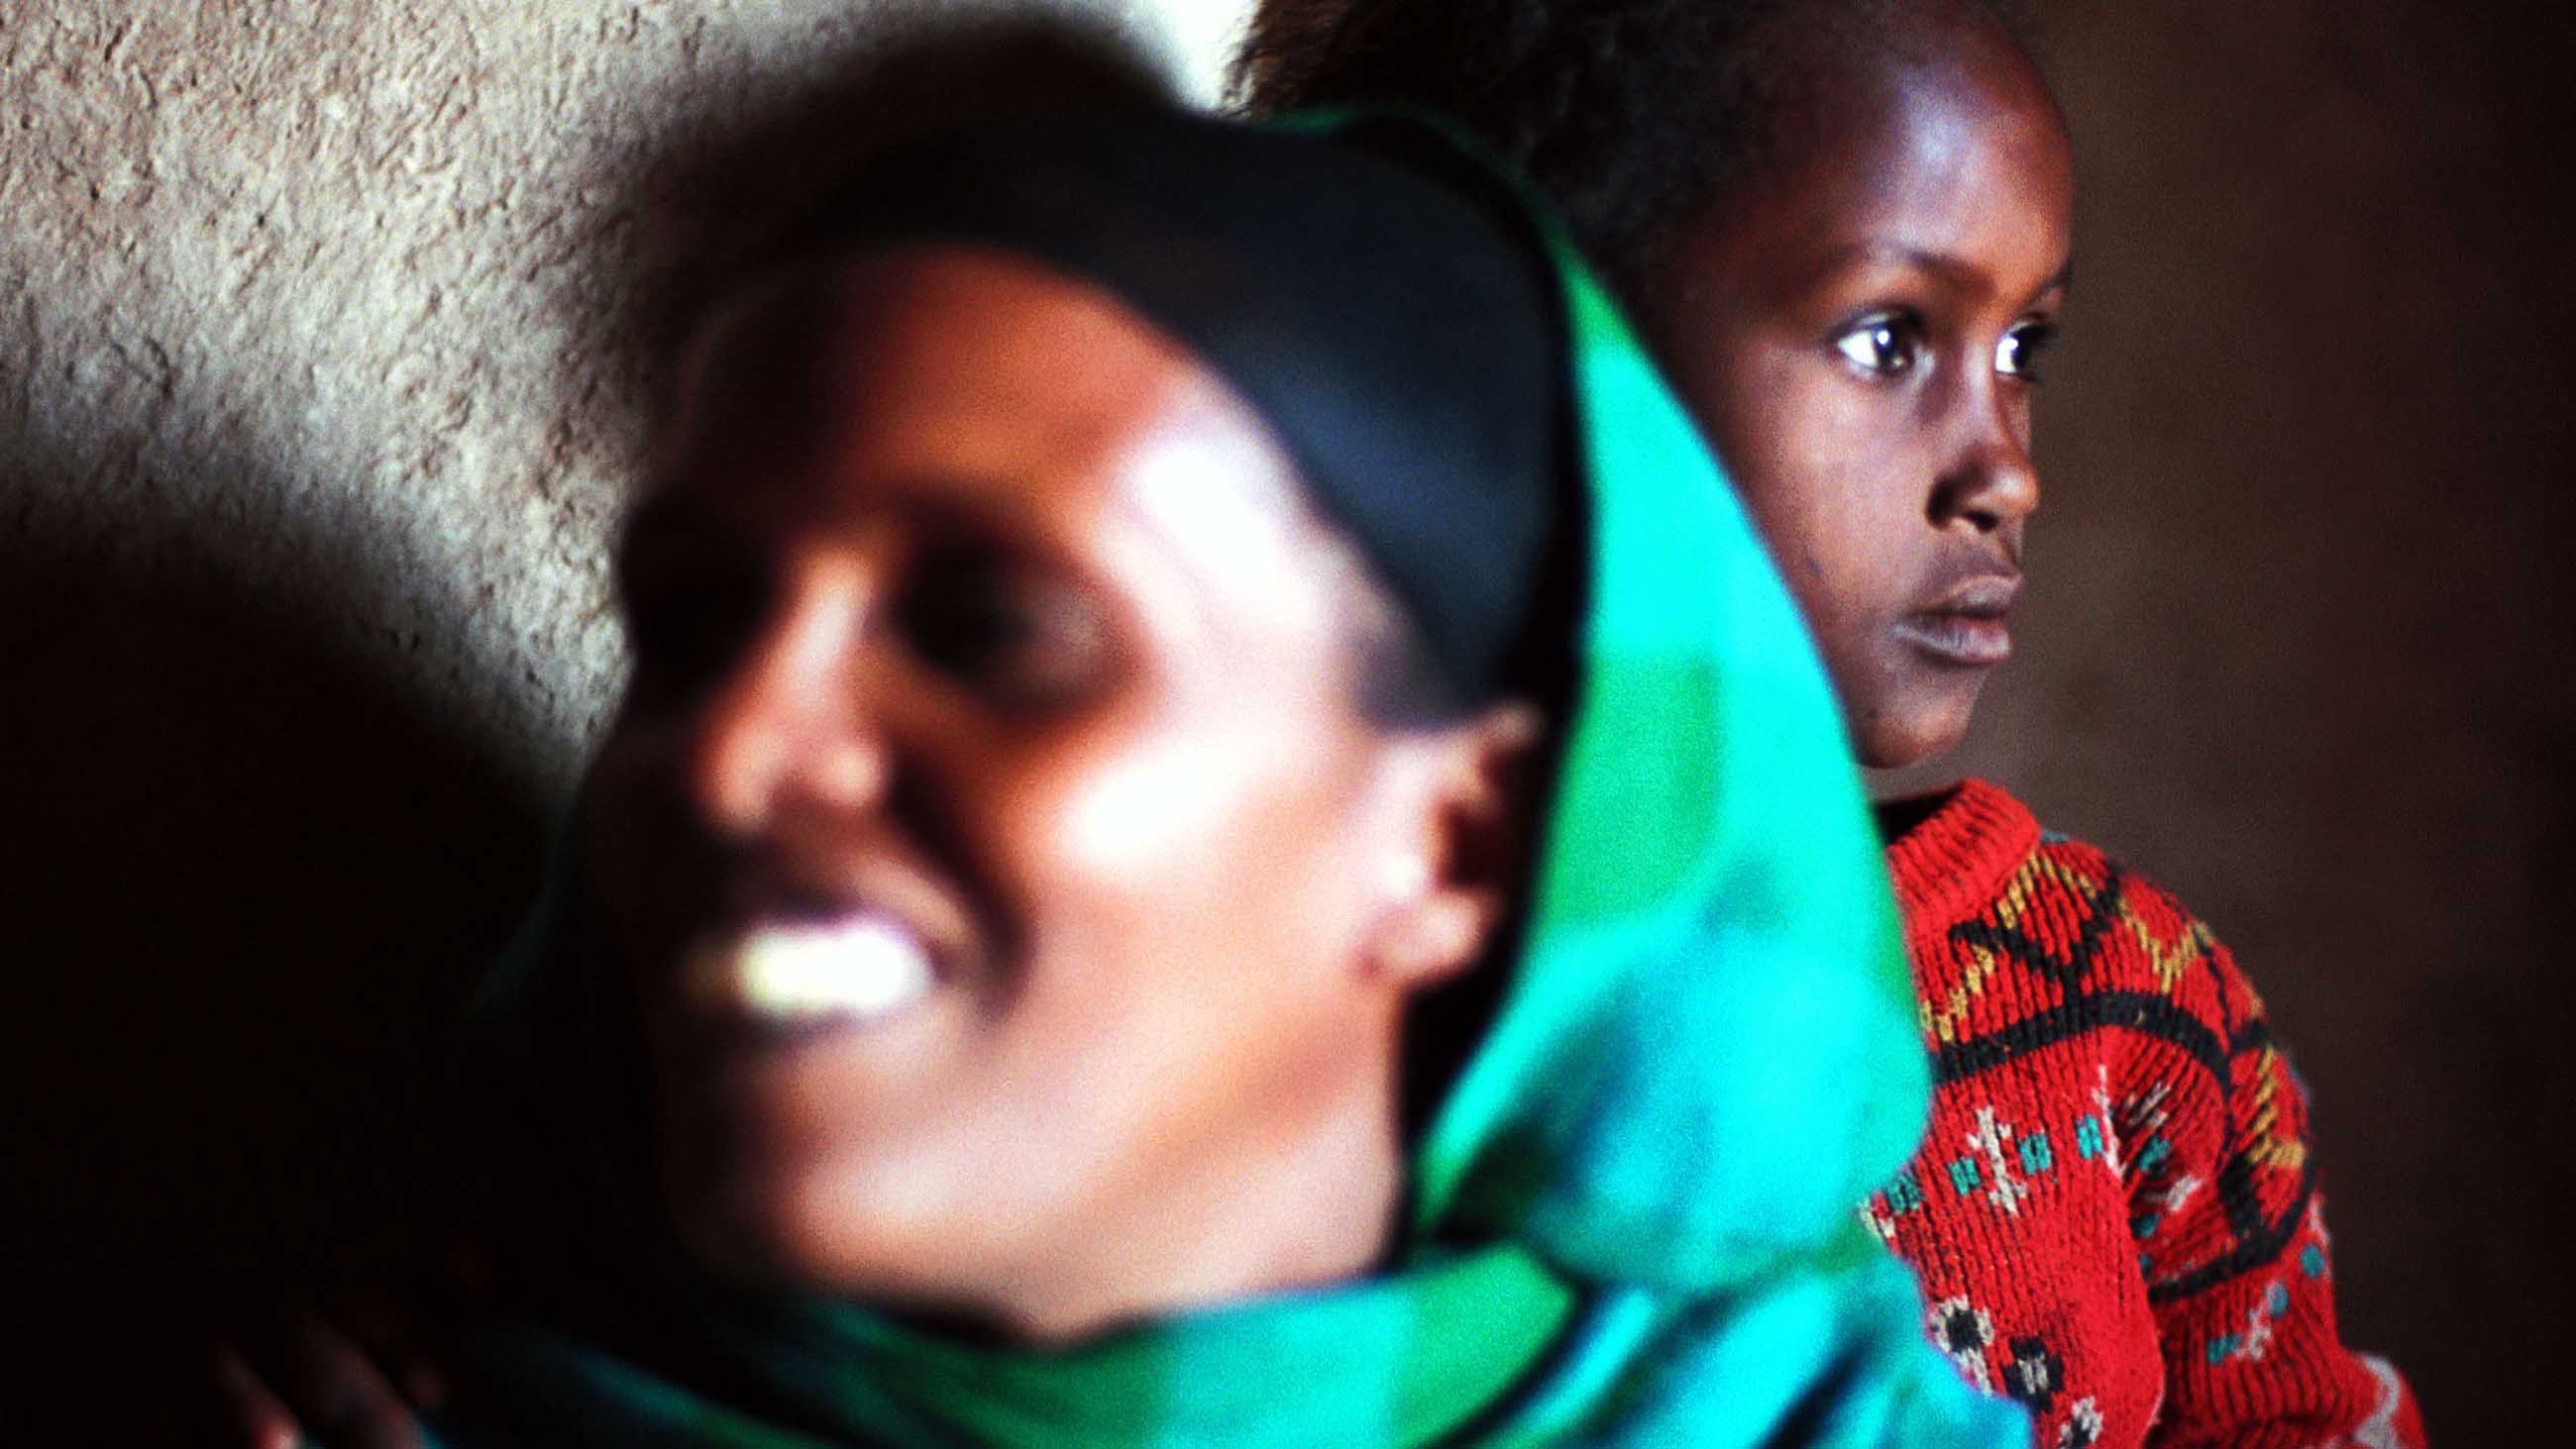 Ethiopian women and girls still face ritual genital mutilation. But open dialogues in communities is helping to end the practice.